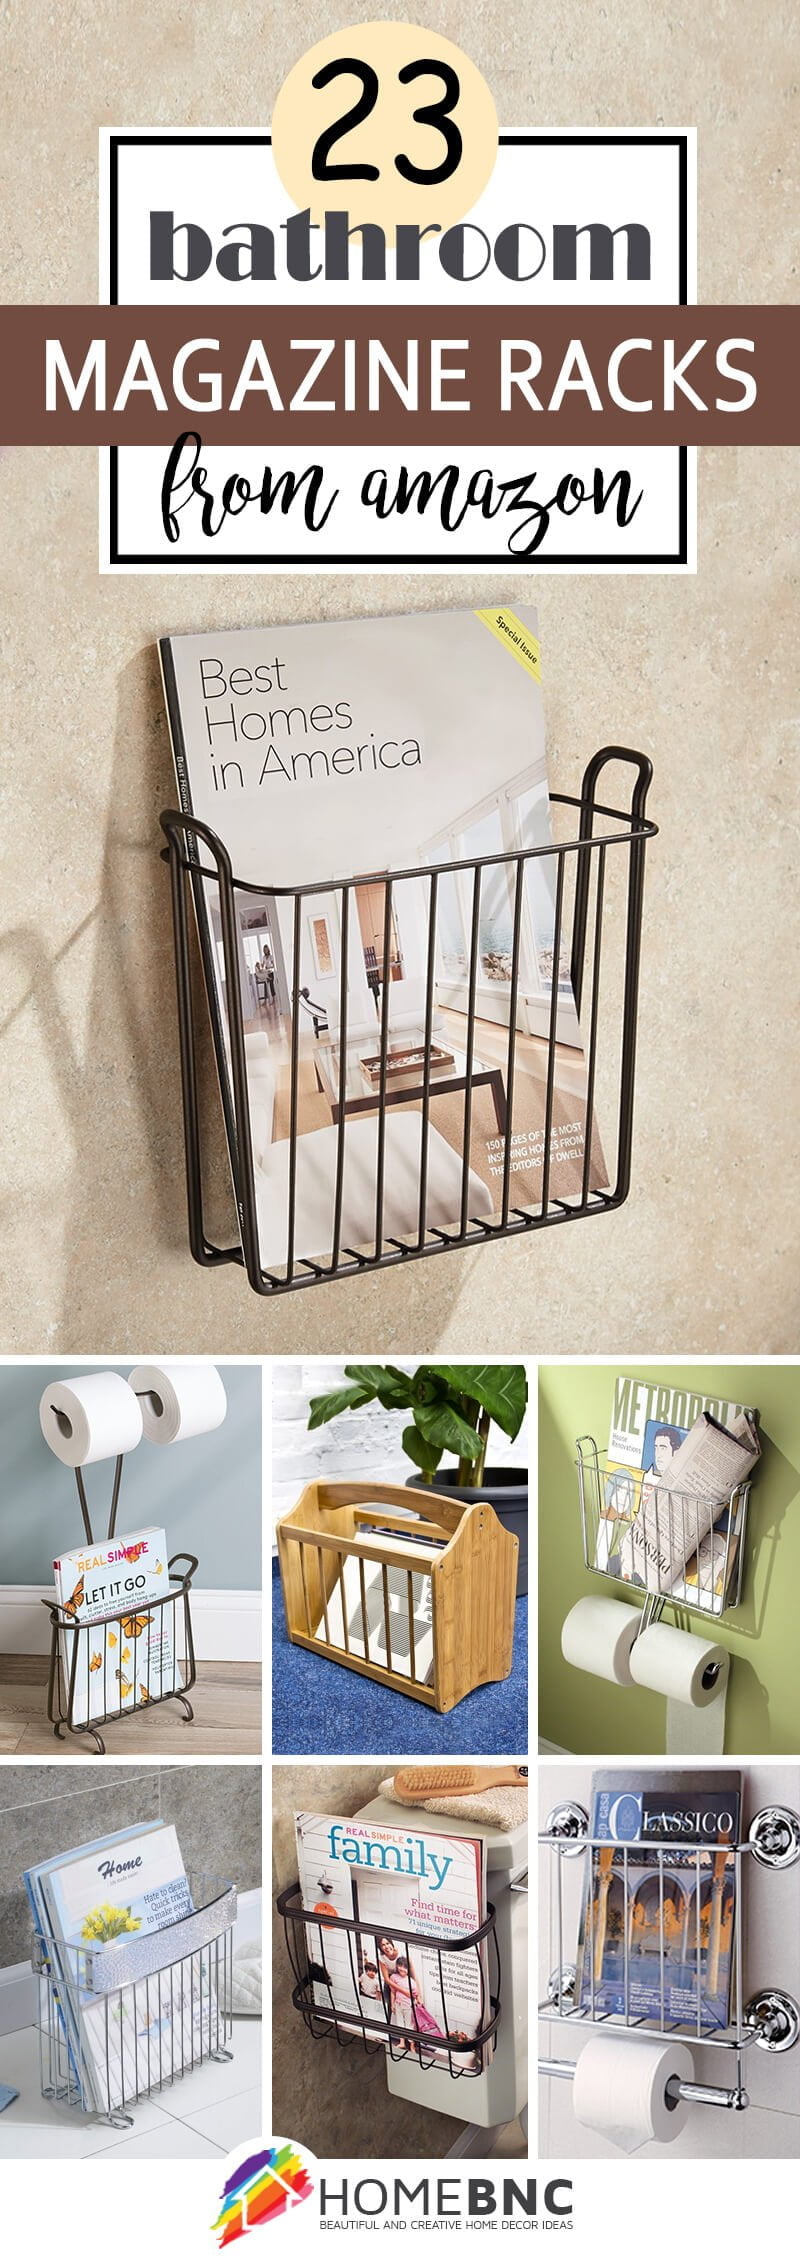 23 Best Bathroom Magazine Rack Ideas to Save Space in 2017